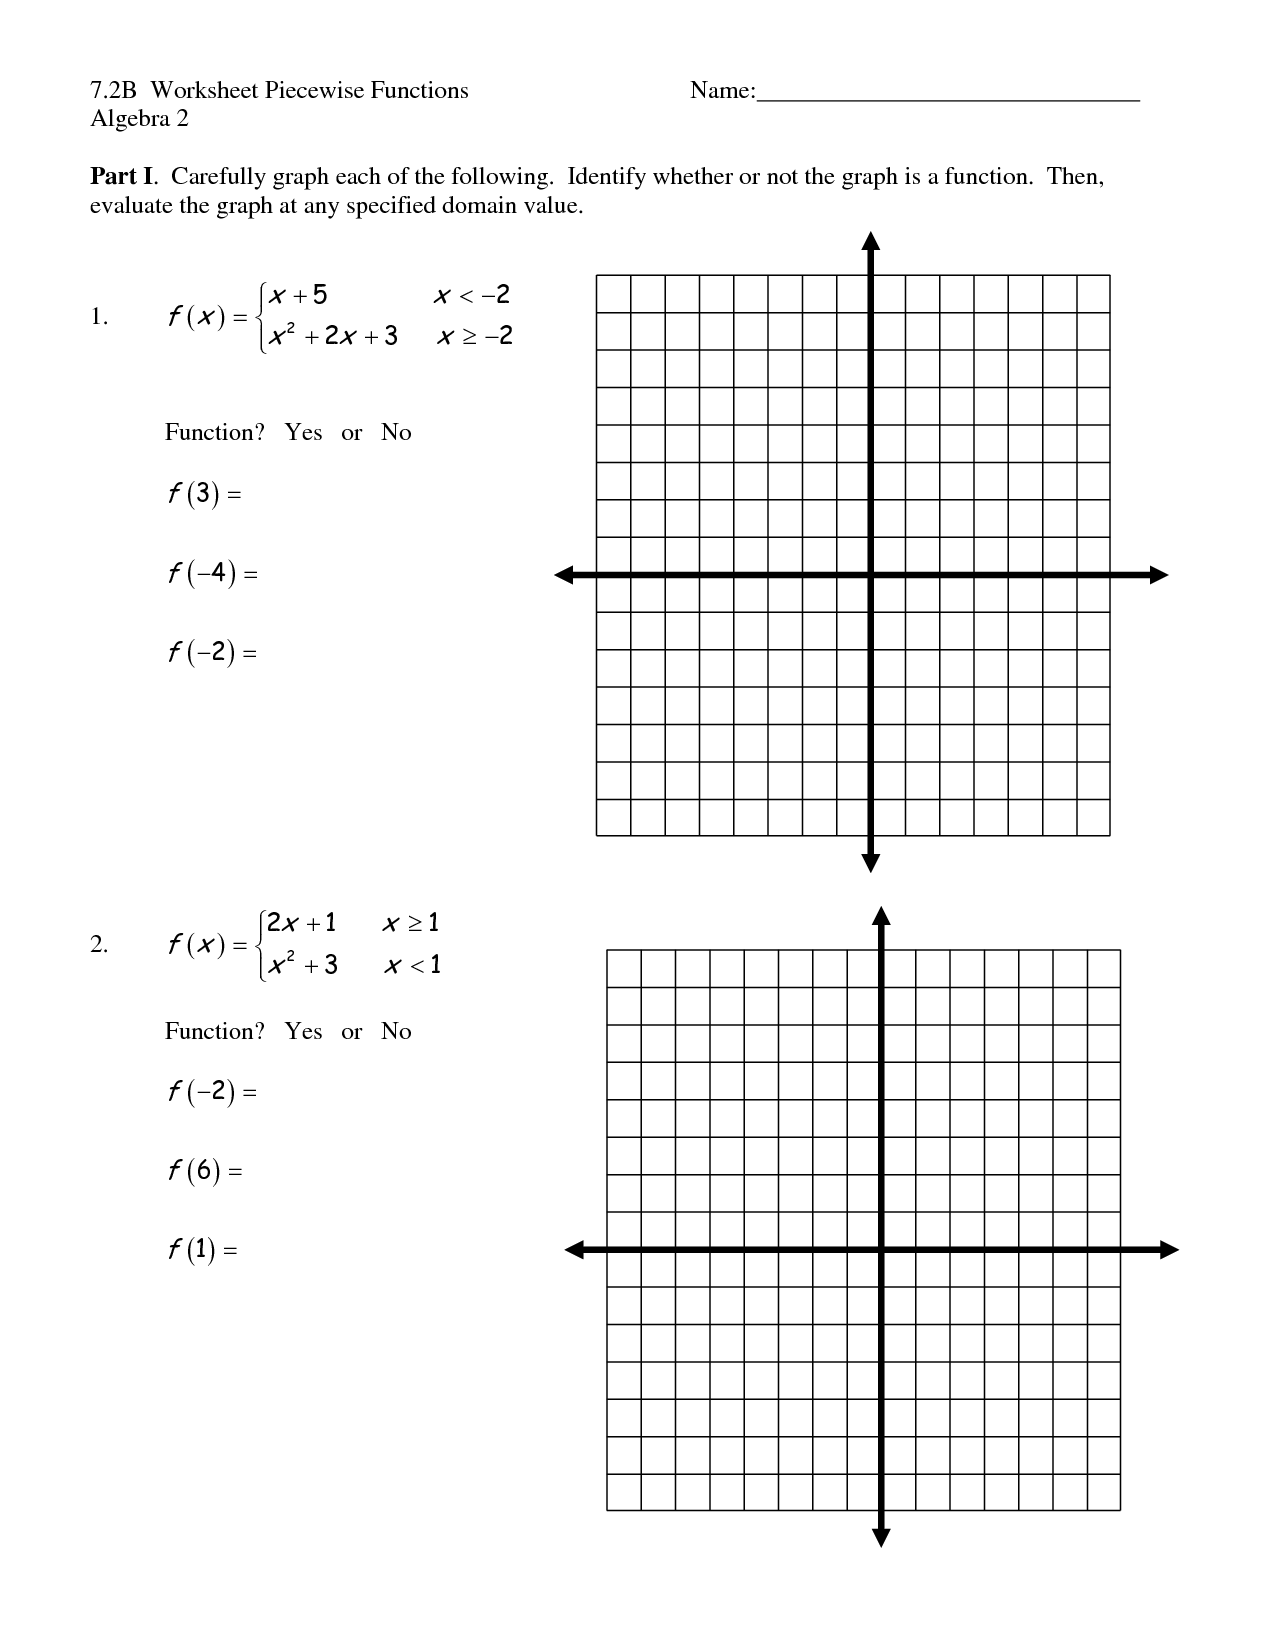 Piecewise Functions Practice Worksheet With Answers - Nidecmege Inside Piecewise Functions Word Problems Worksheet